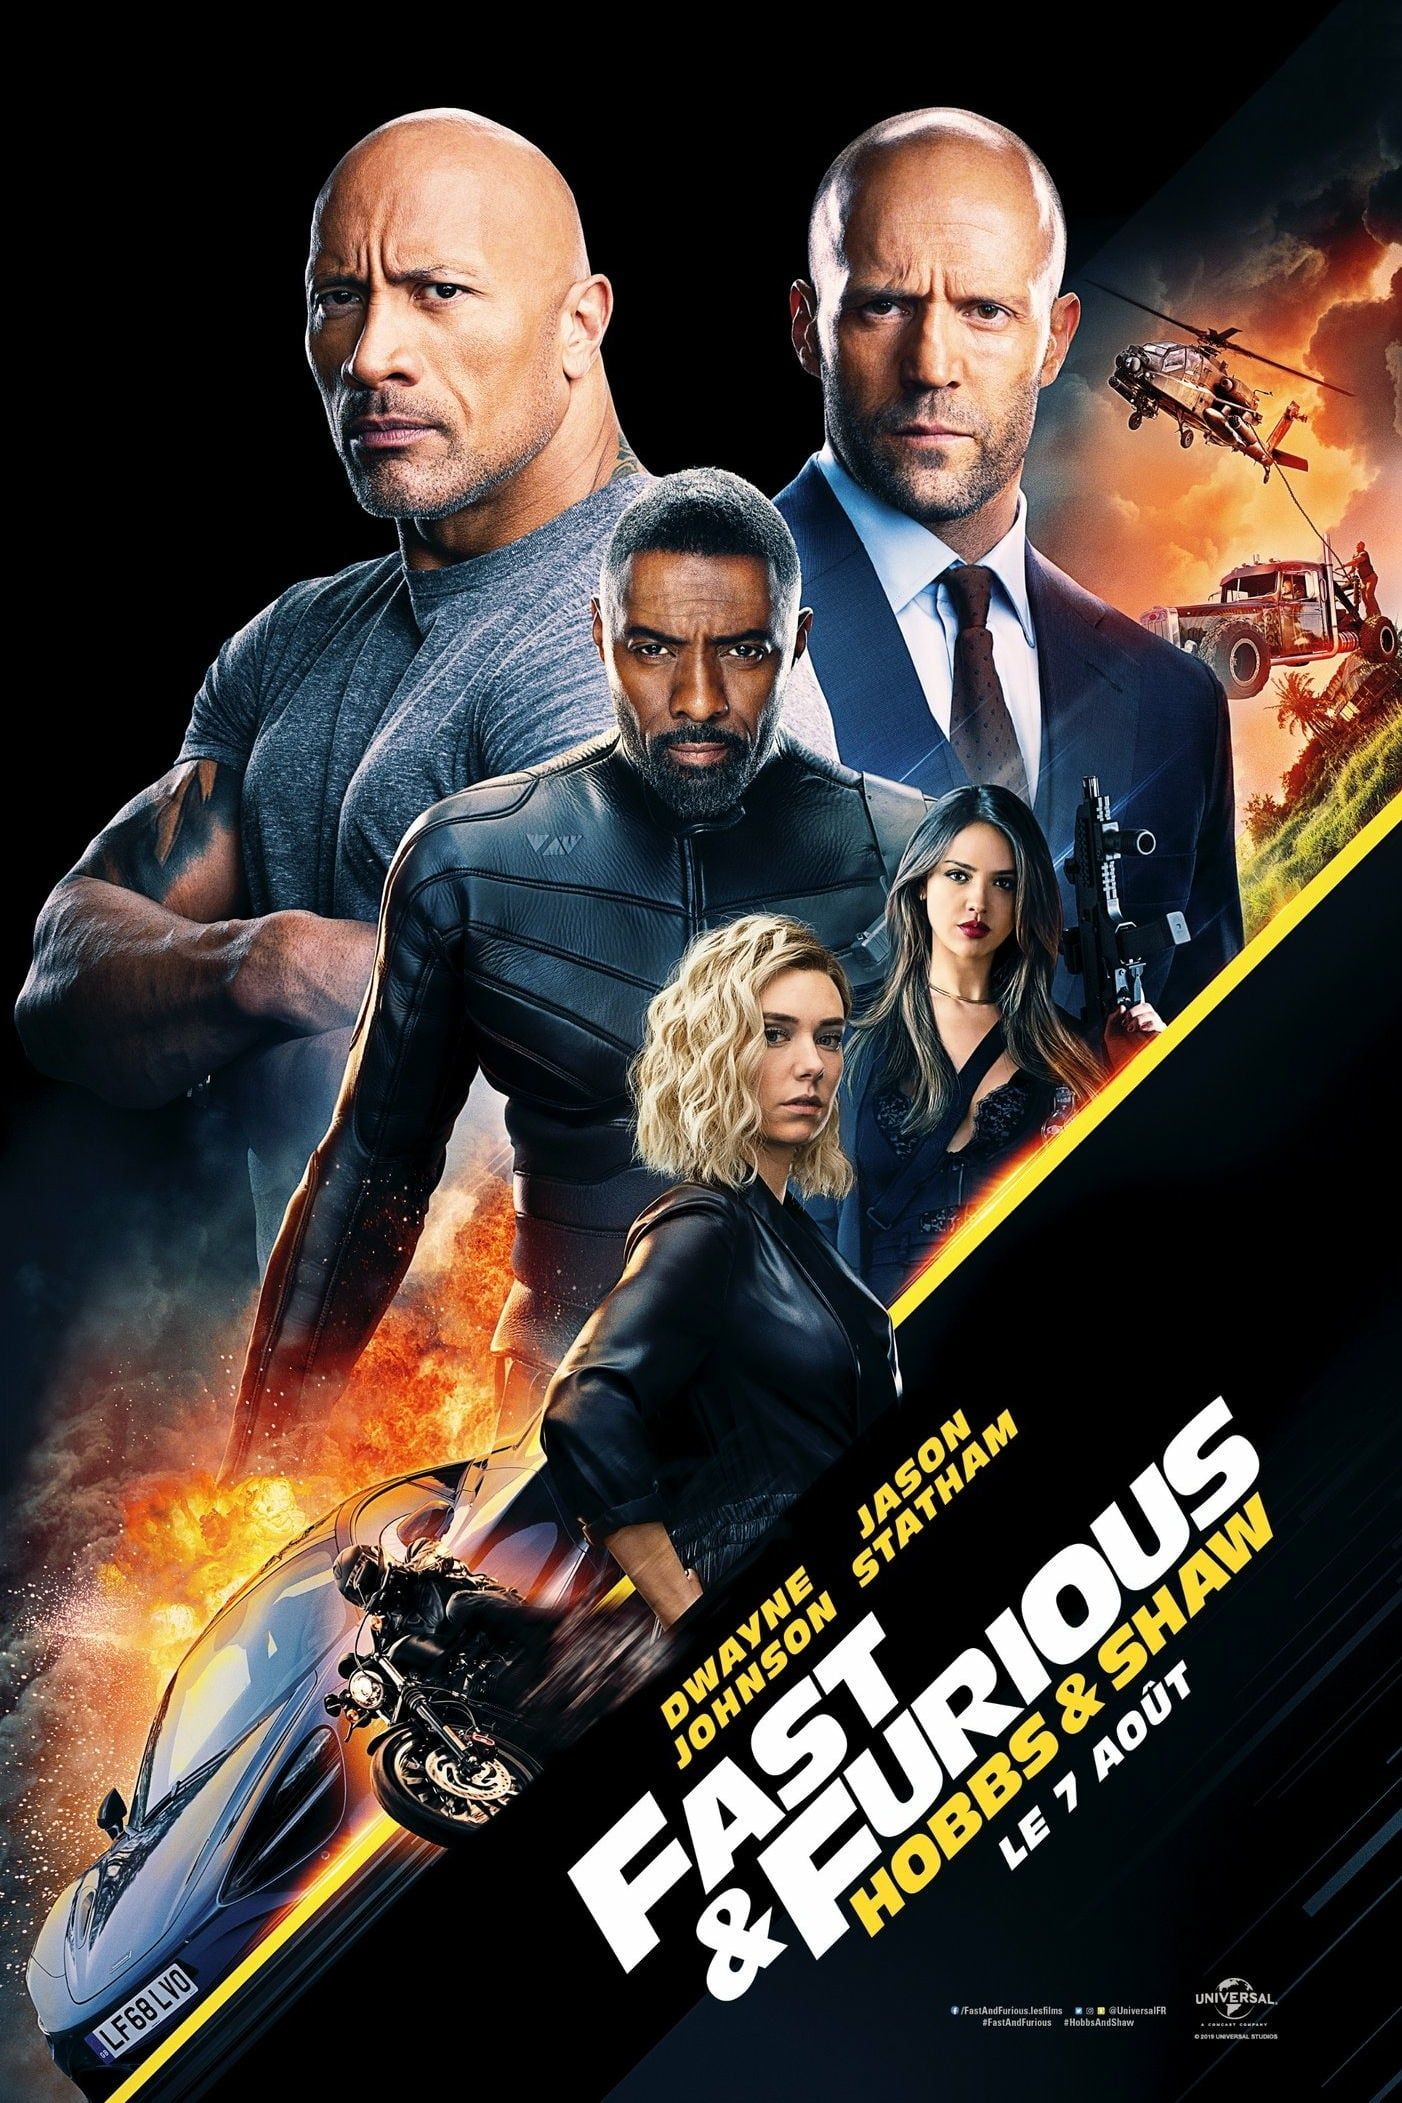 new fast and furious movie reviews